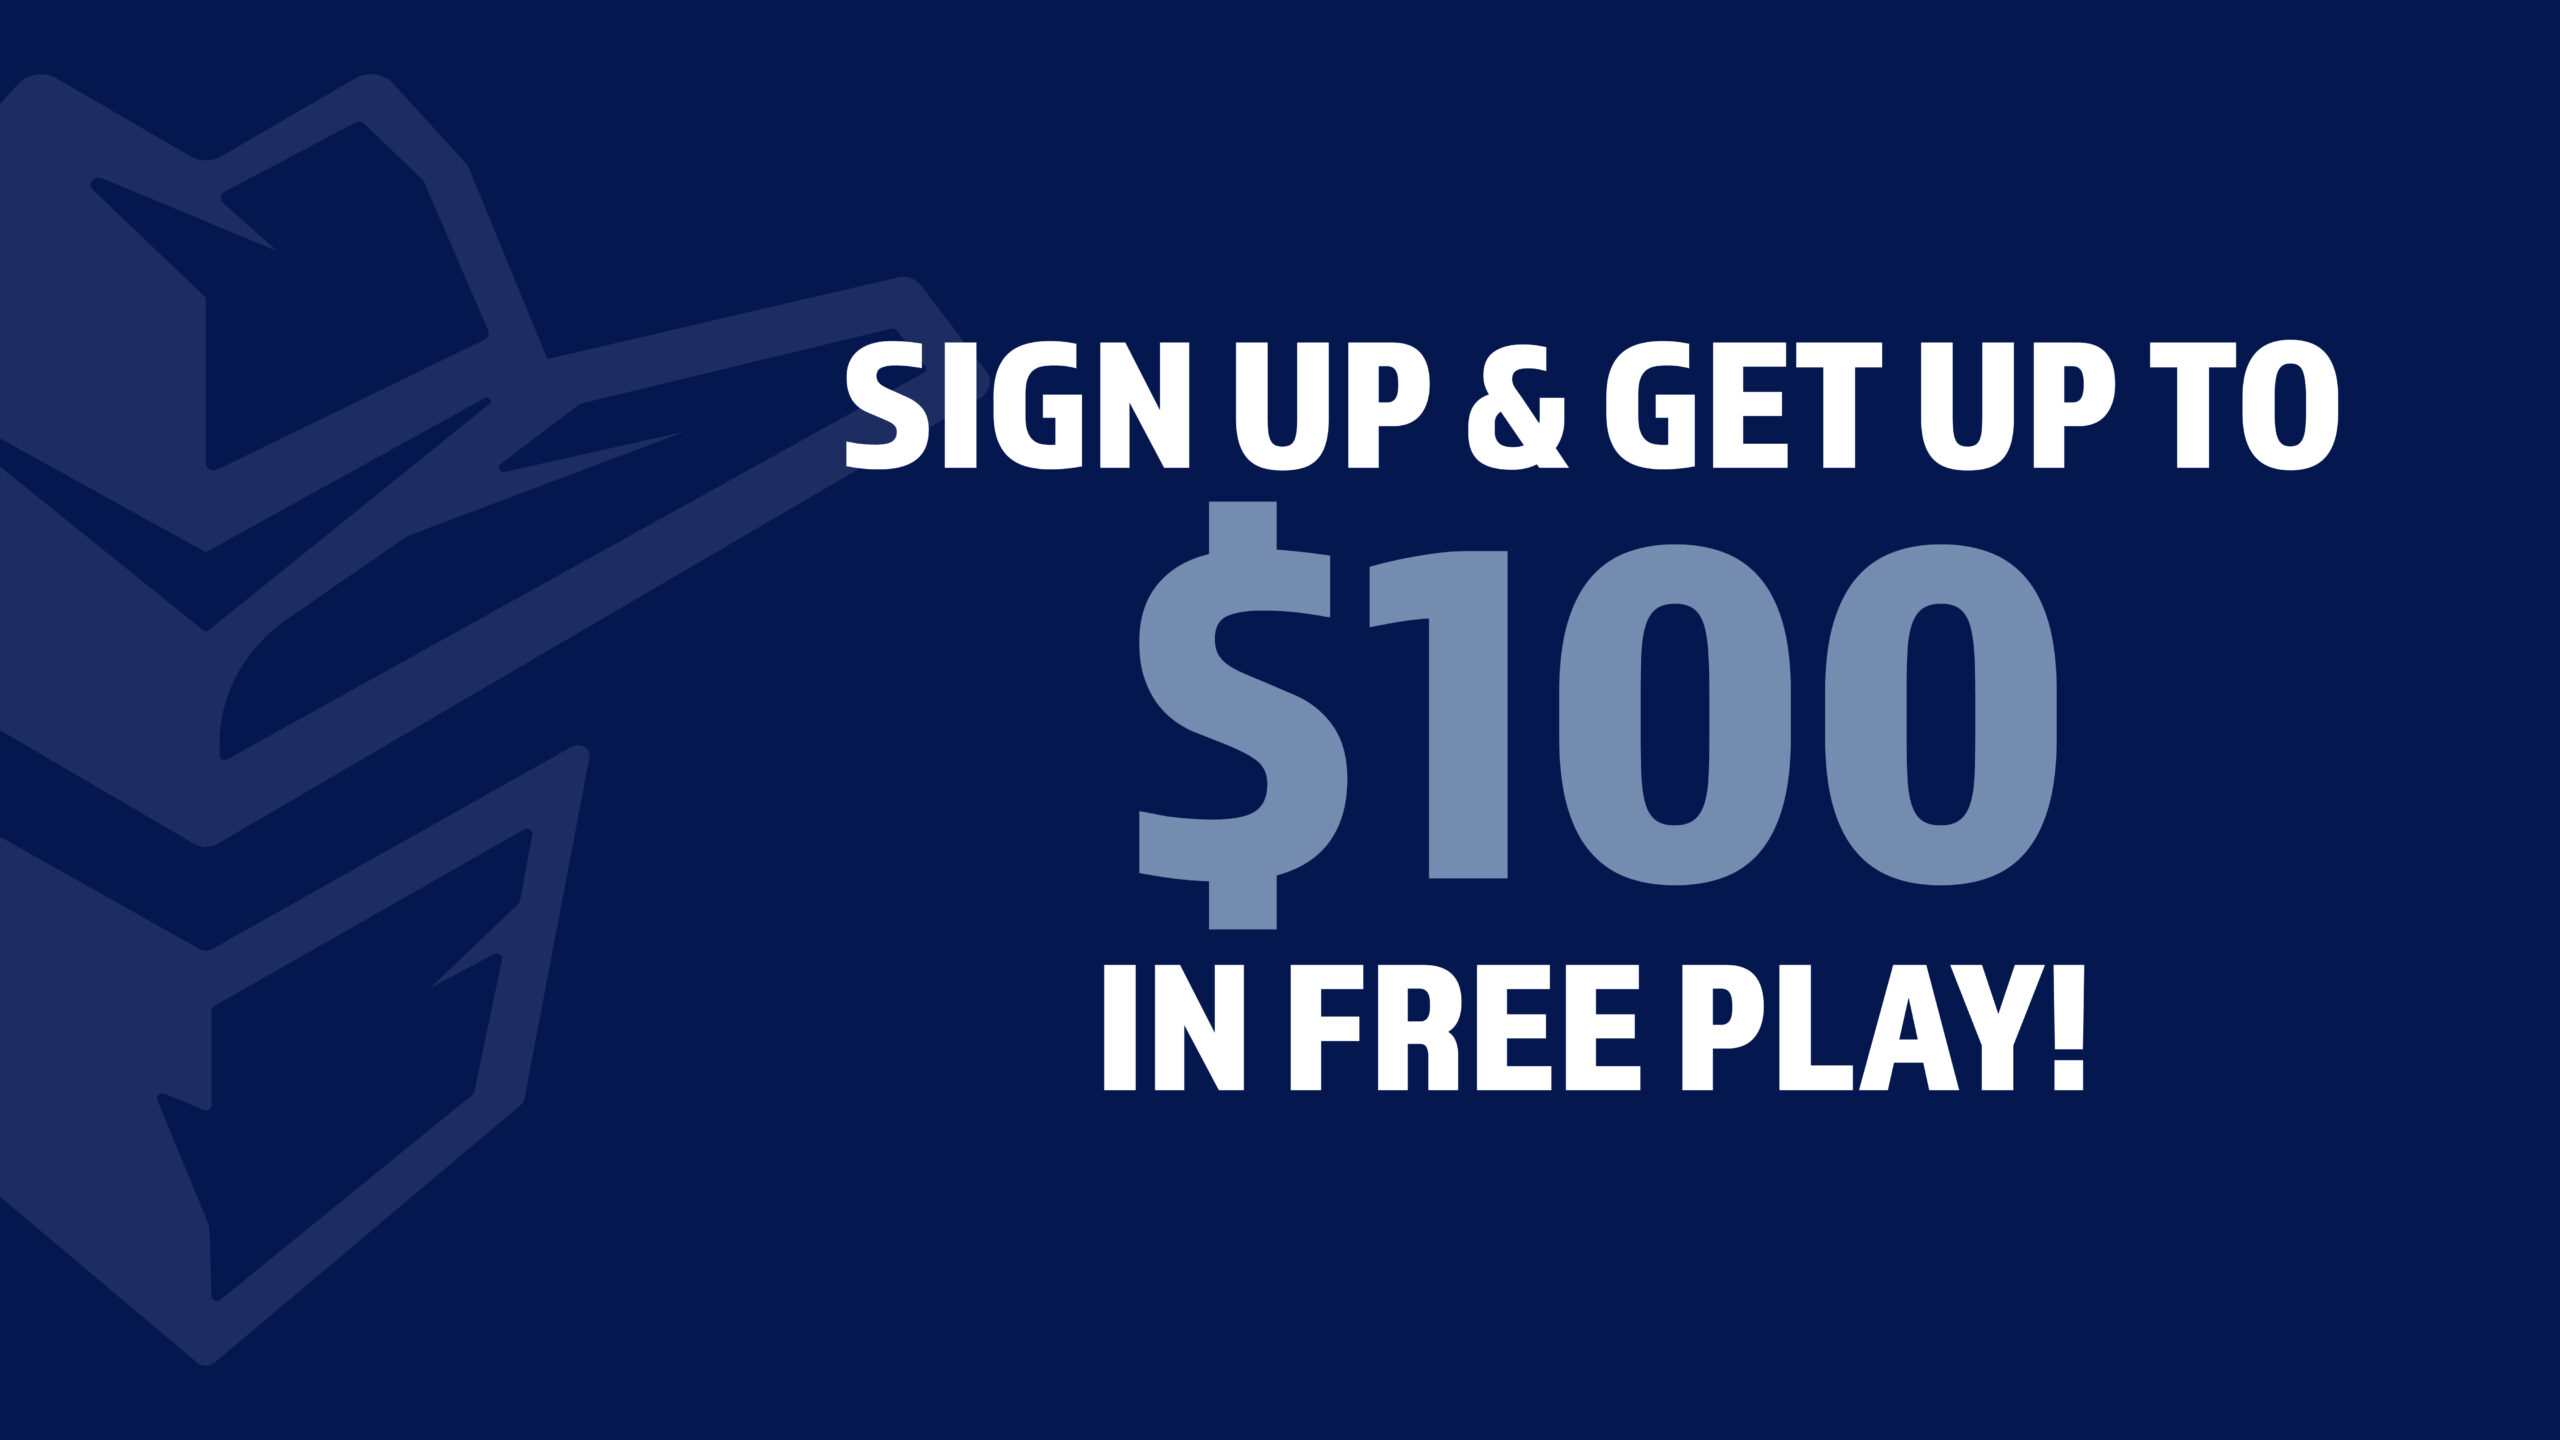 Sign up and get up to $100 in free play.